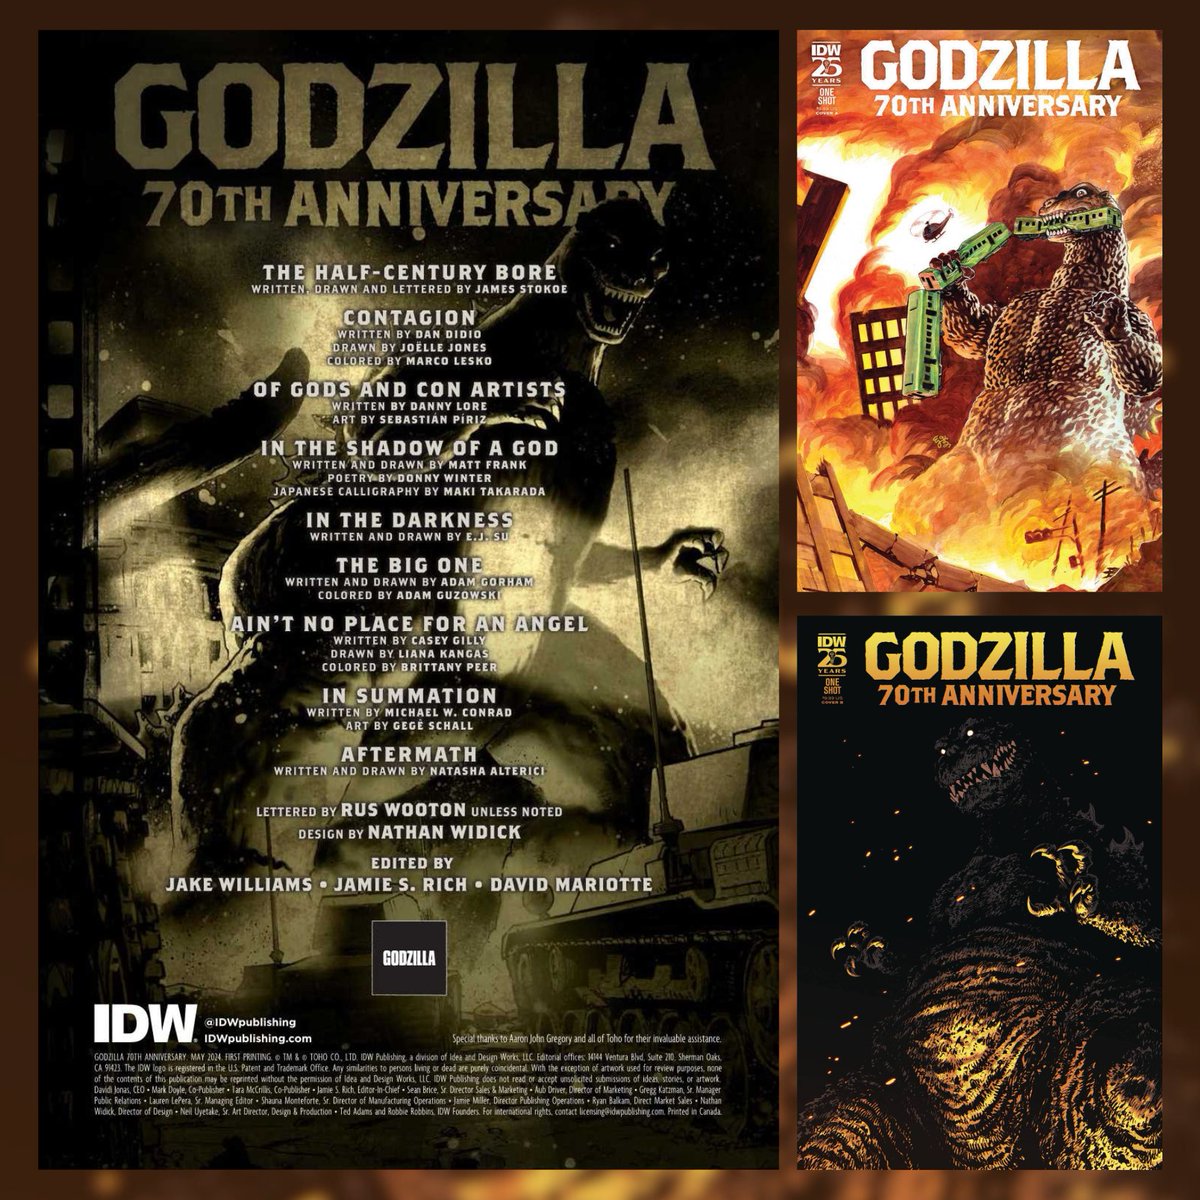 #Godzilla's 70th Anniversary released in stores this week! From the wild frontiers of the American Old West to the bustling streets of modern Tokyo, this one-shot features an incredible lineup of creators! I'm so thrilled to have worked with @RunBarbara @br_peer & @JakeB_Williams